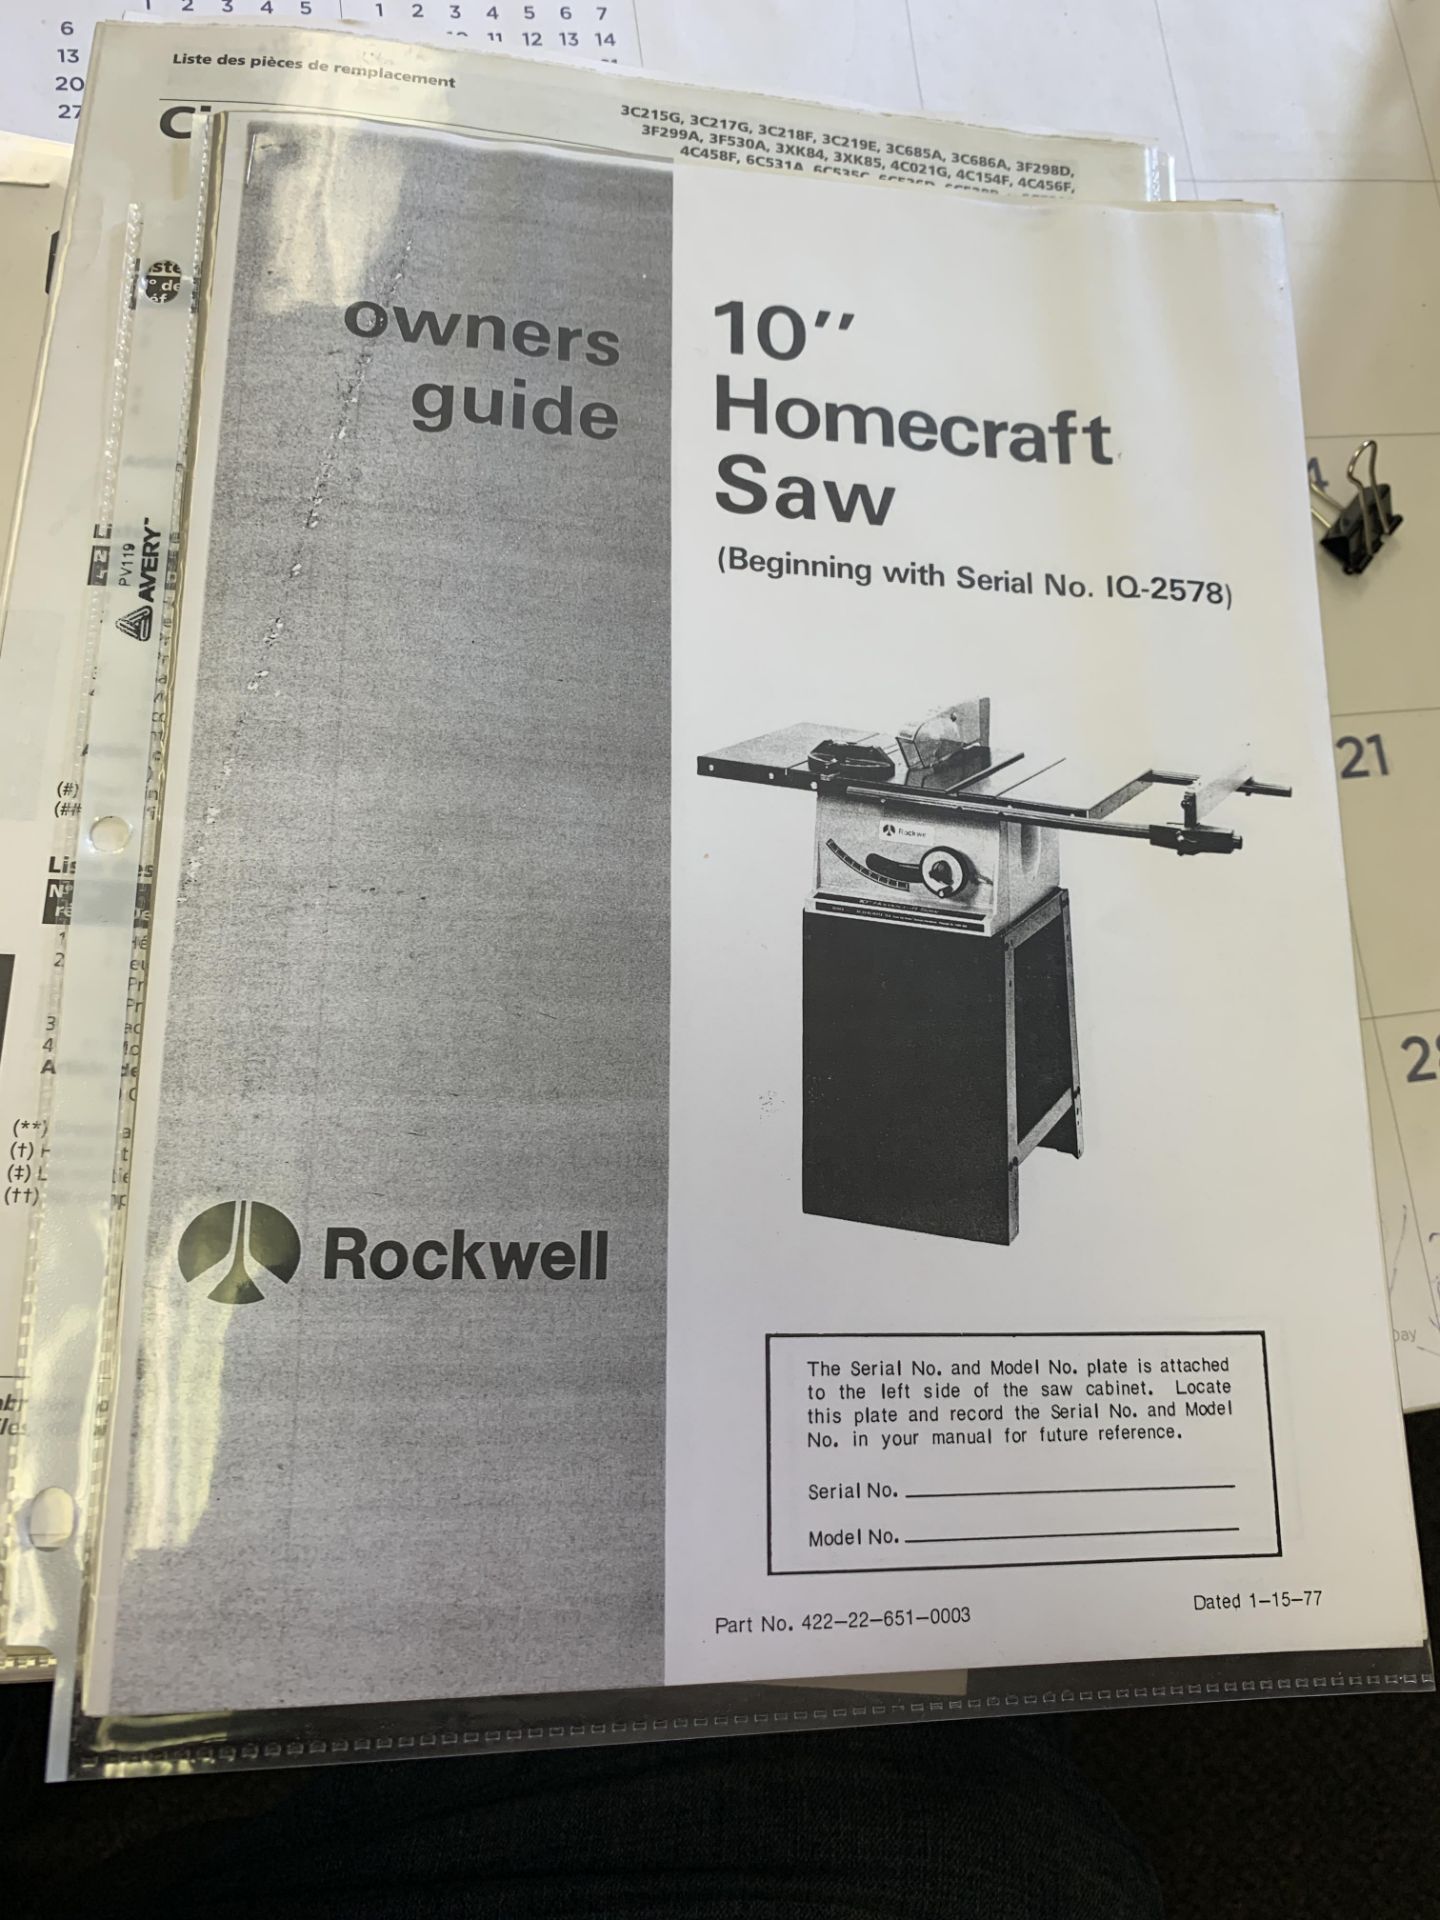 ROCKWELL 10" Homecraft Table Saw - Image 10 of 10